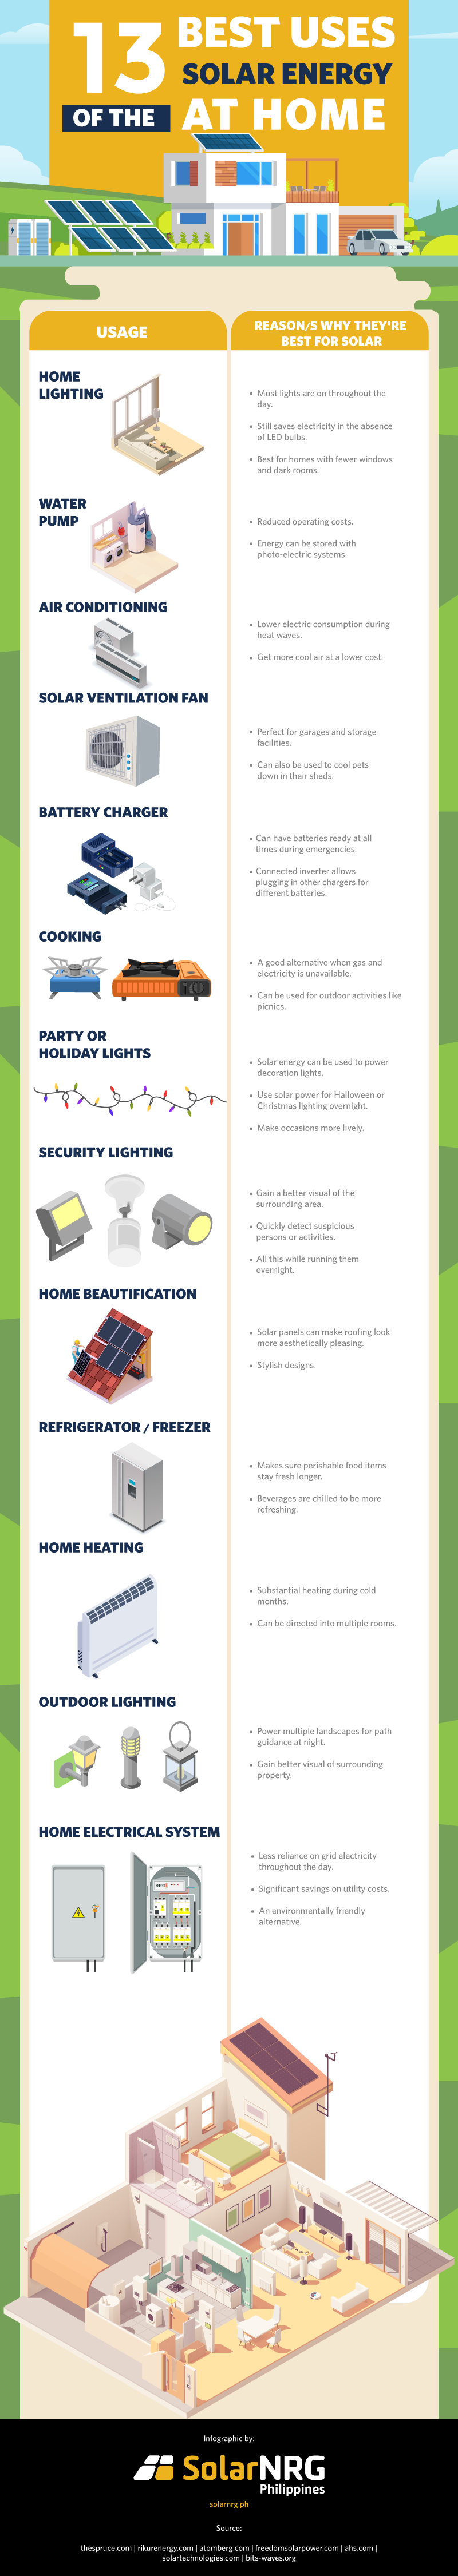 Infographic Guide to the Best Uses of Solar Energy at Home